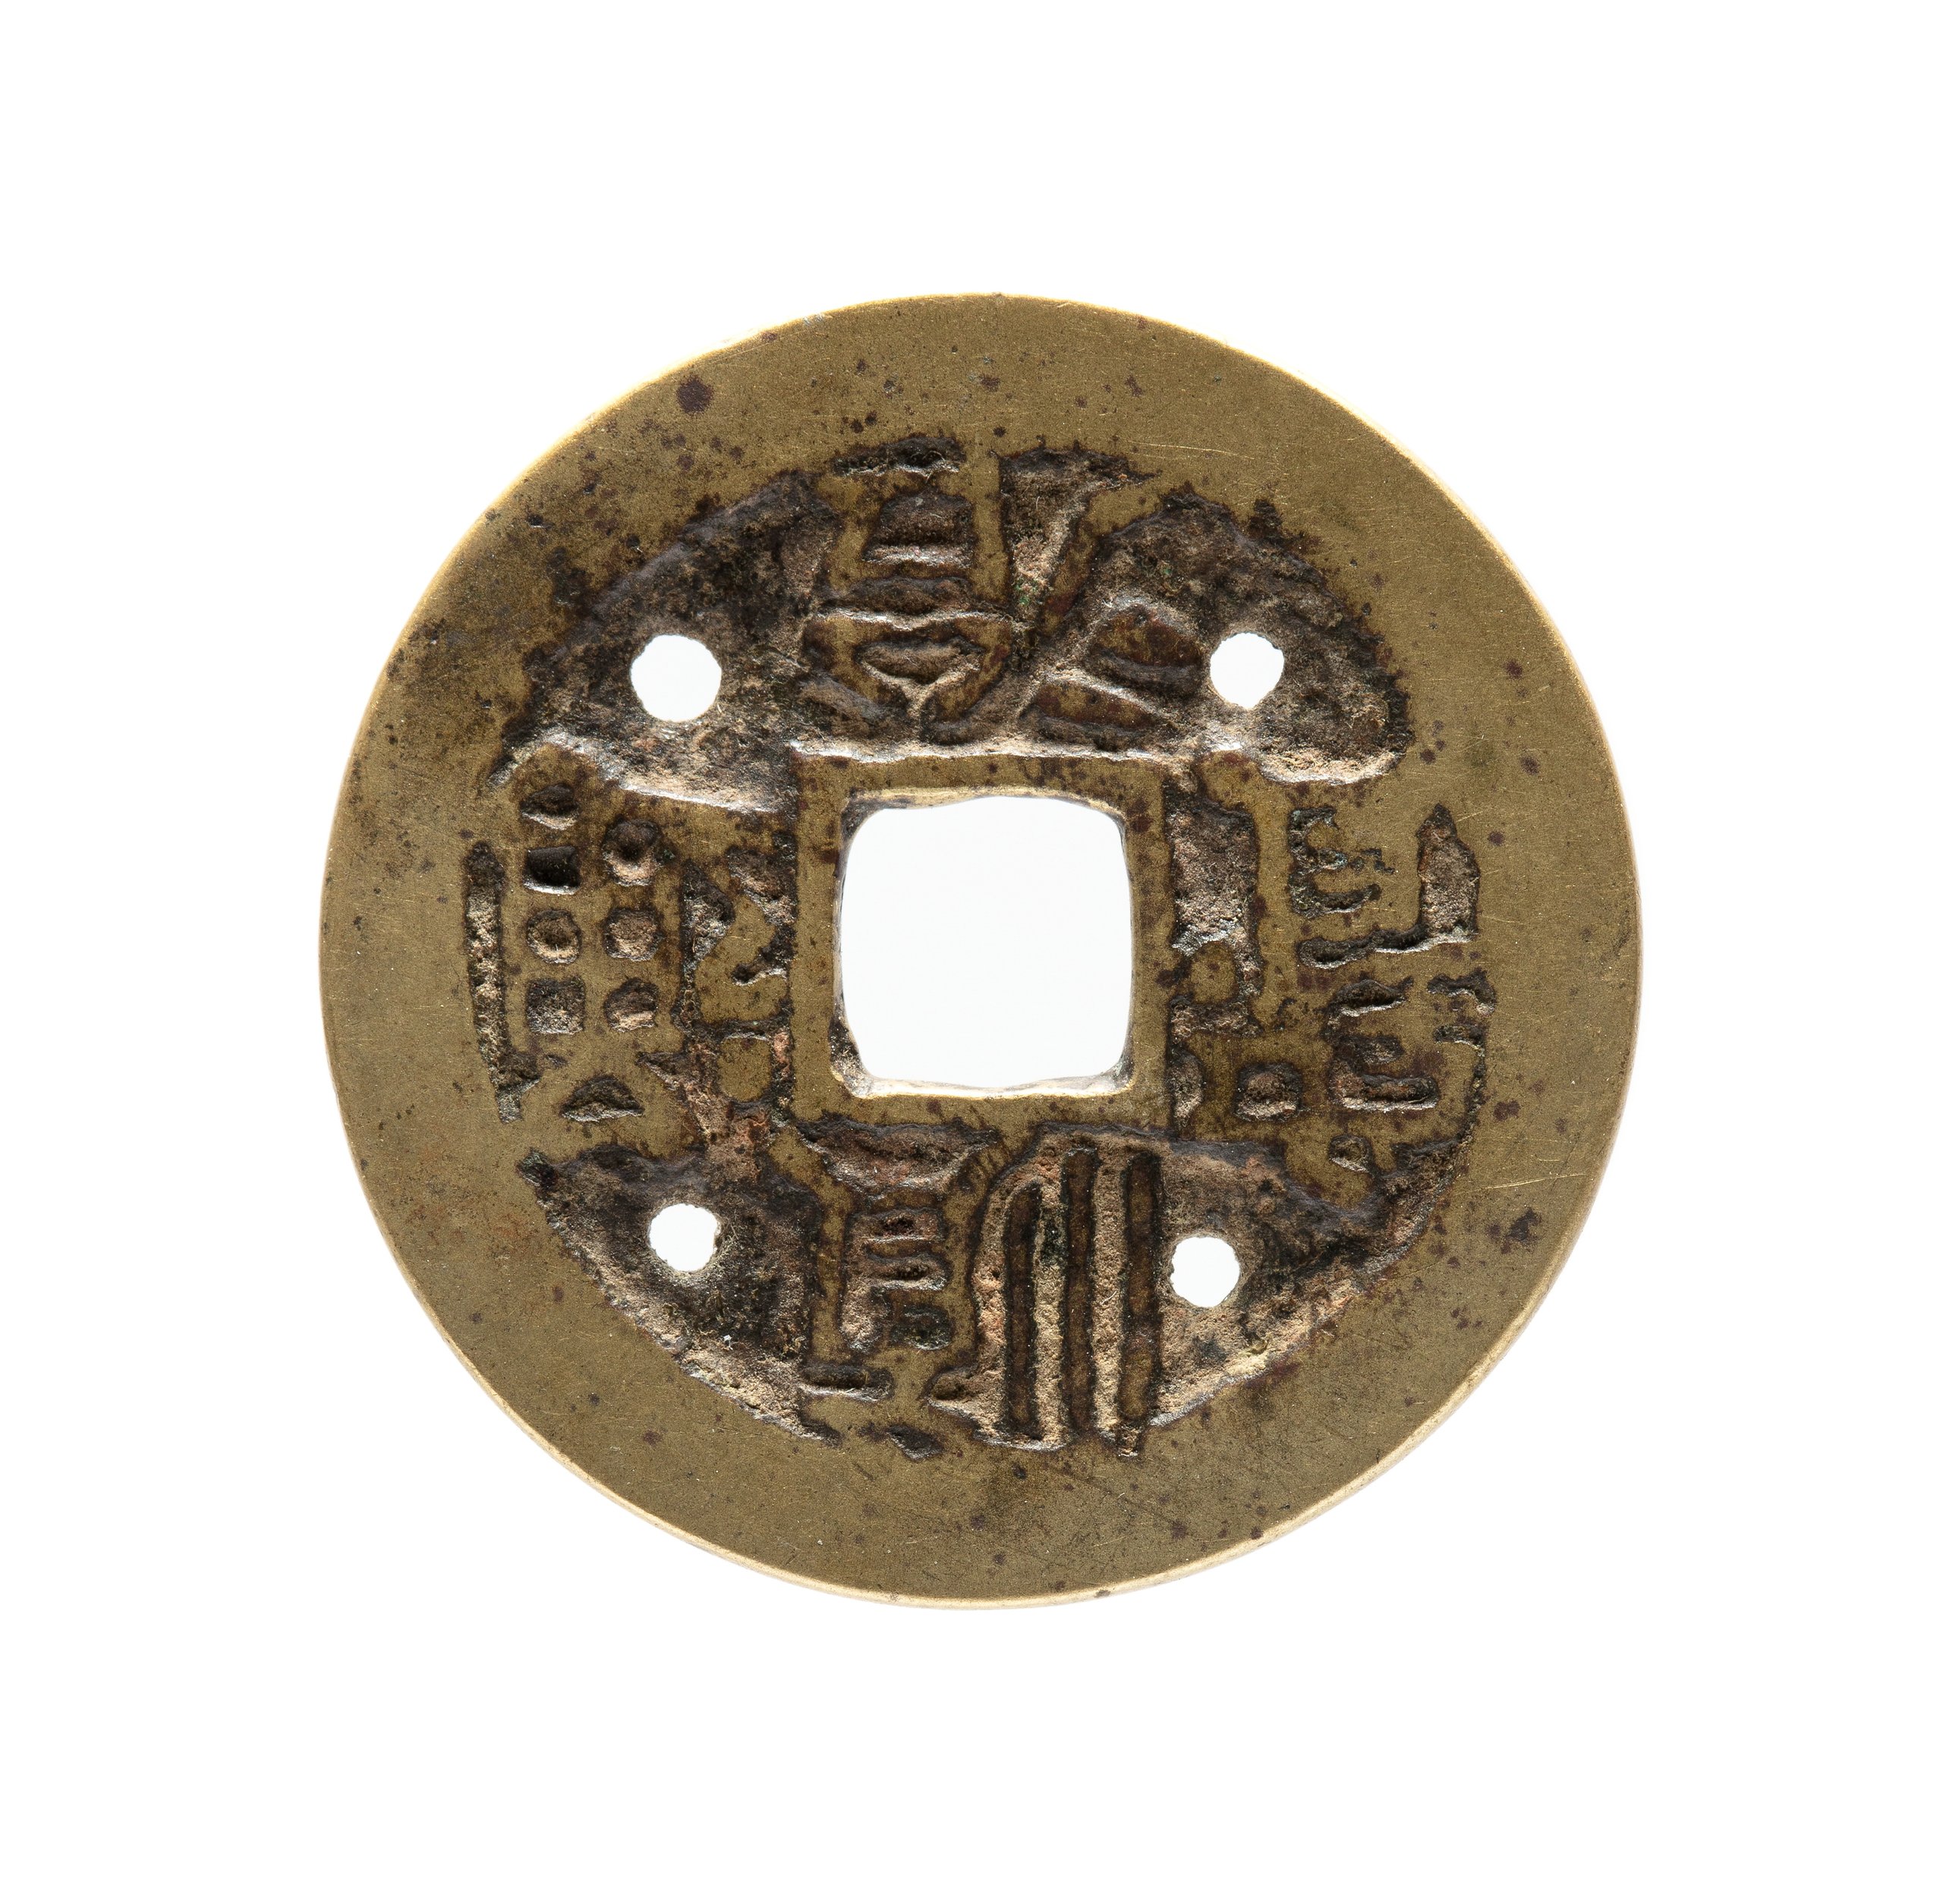 Chinese coin from Qing Dynasty